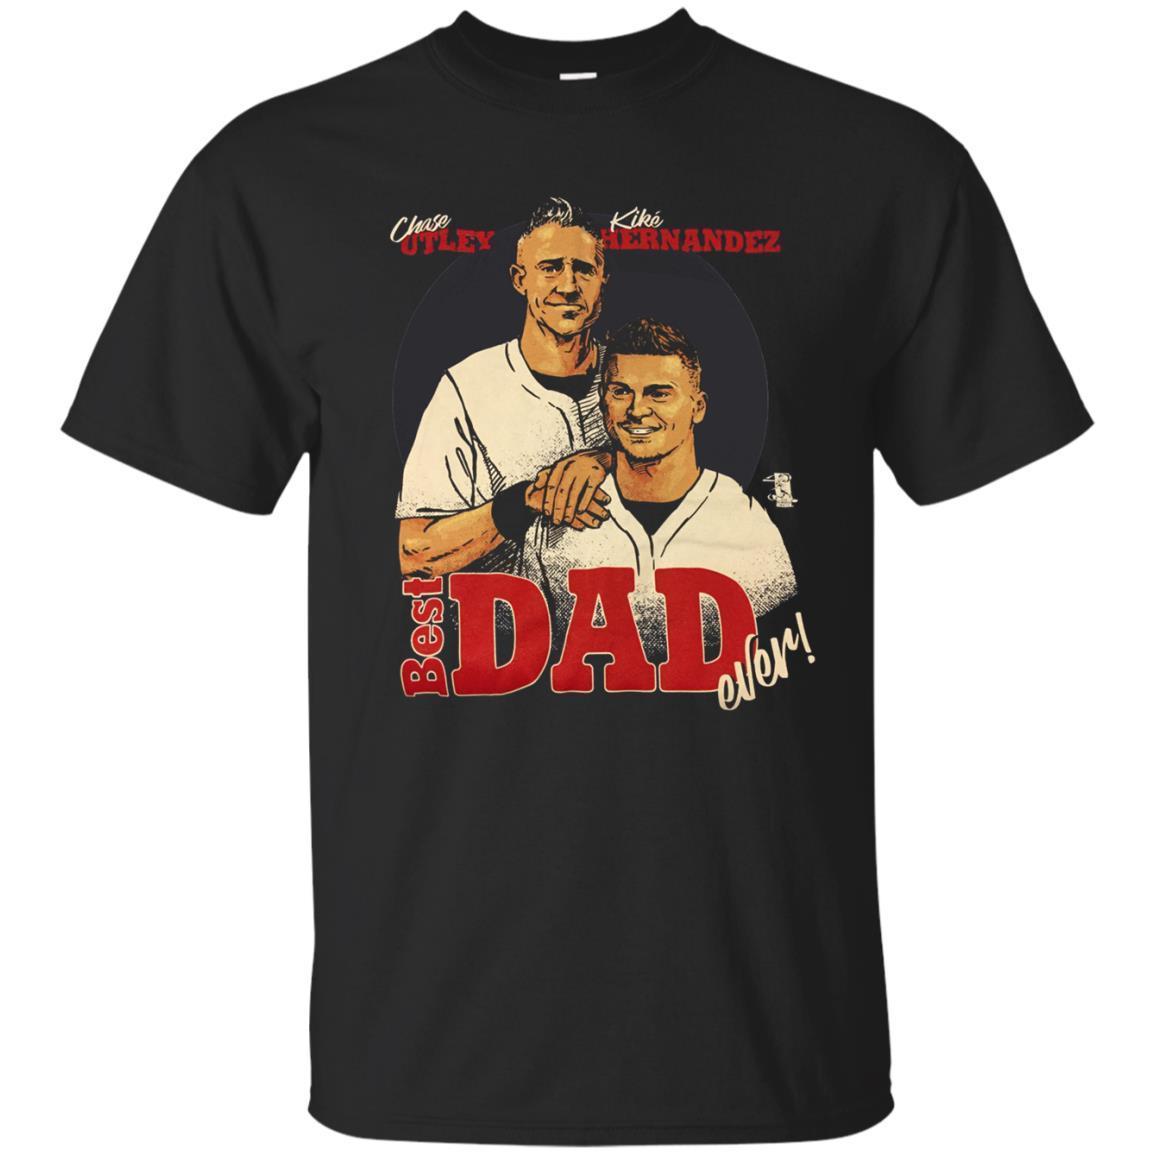 Check Out This Awesome The Dodgers Chase Utley Enrique Hernandez Father Son Best Dad Ever Classic T-shirt